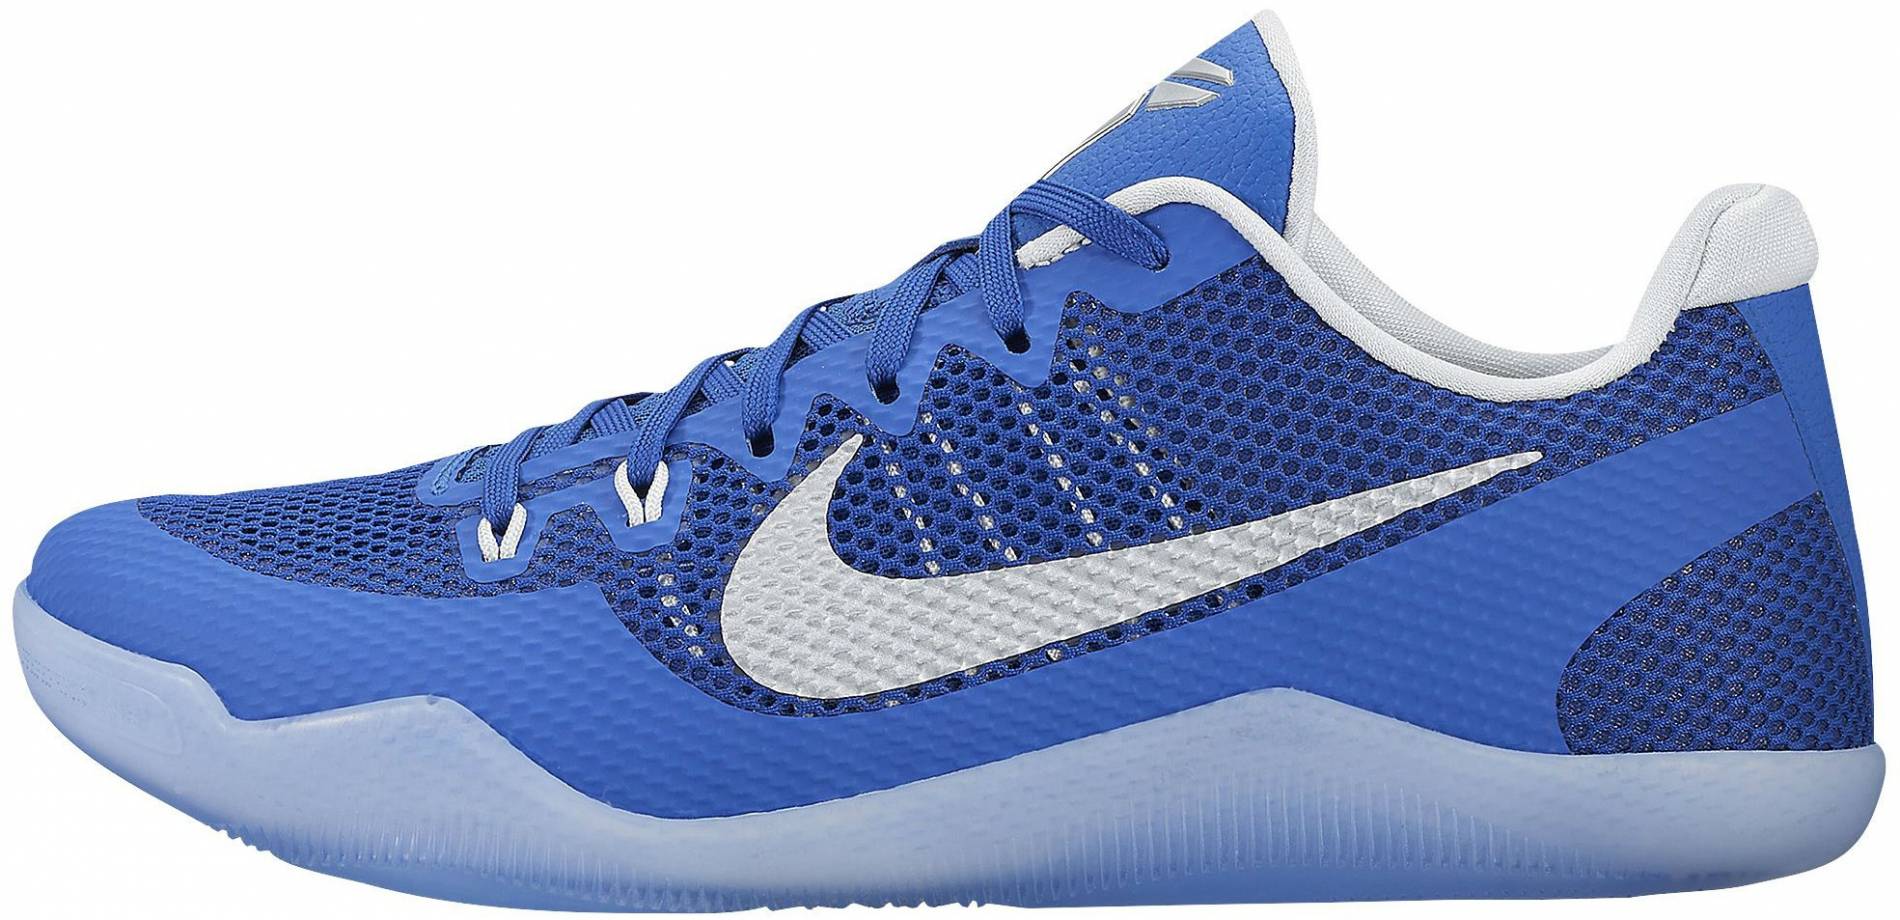 kobe shoes blue and white